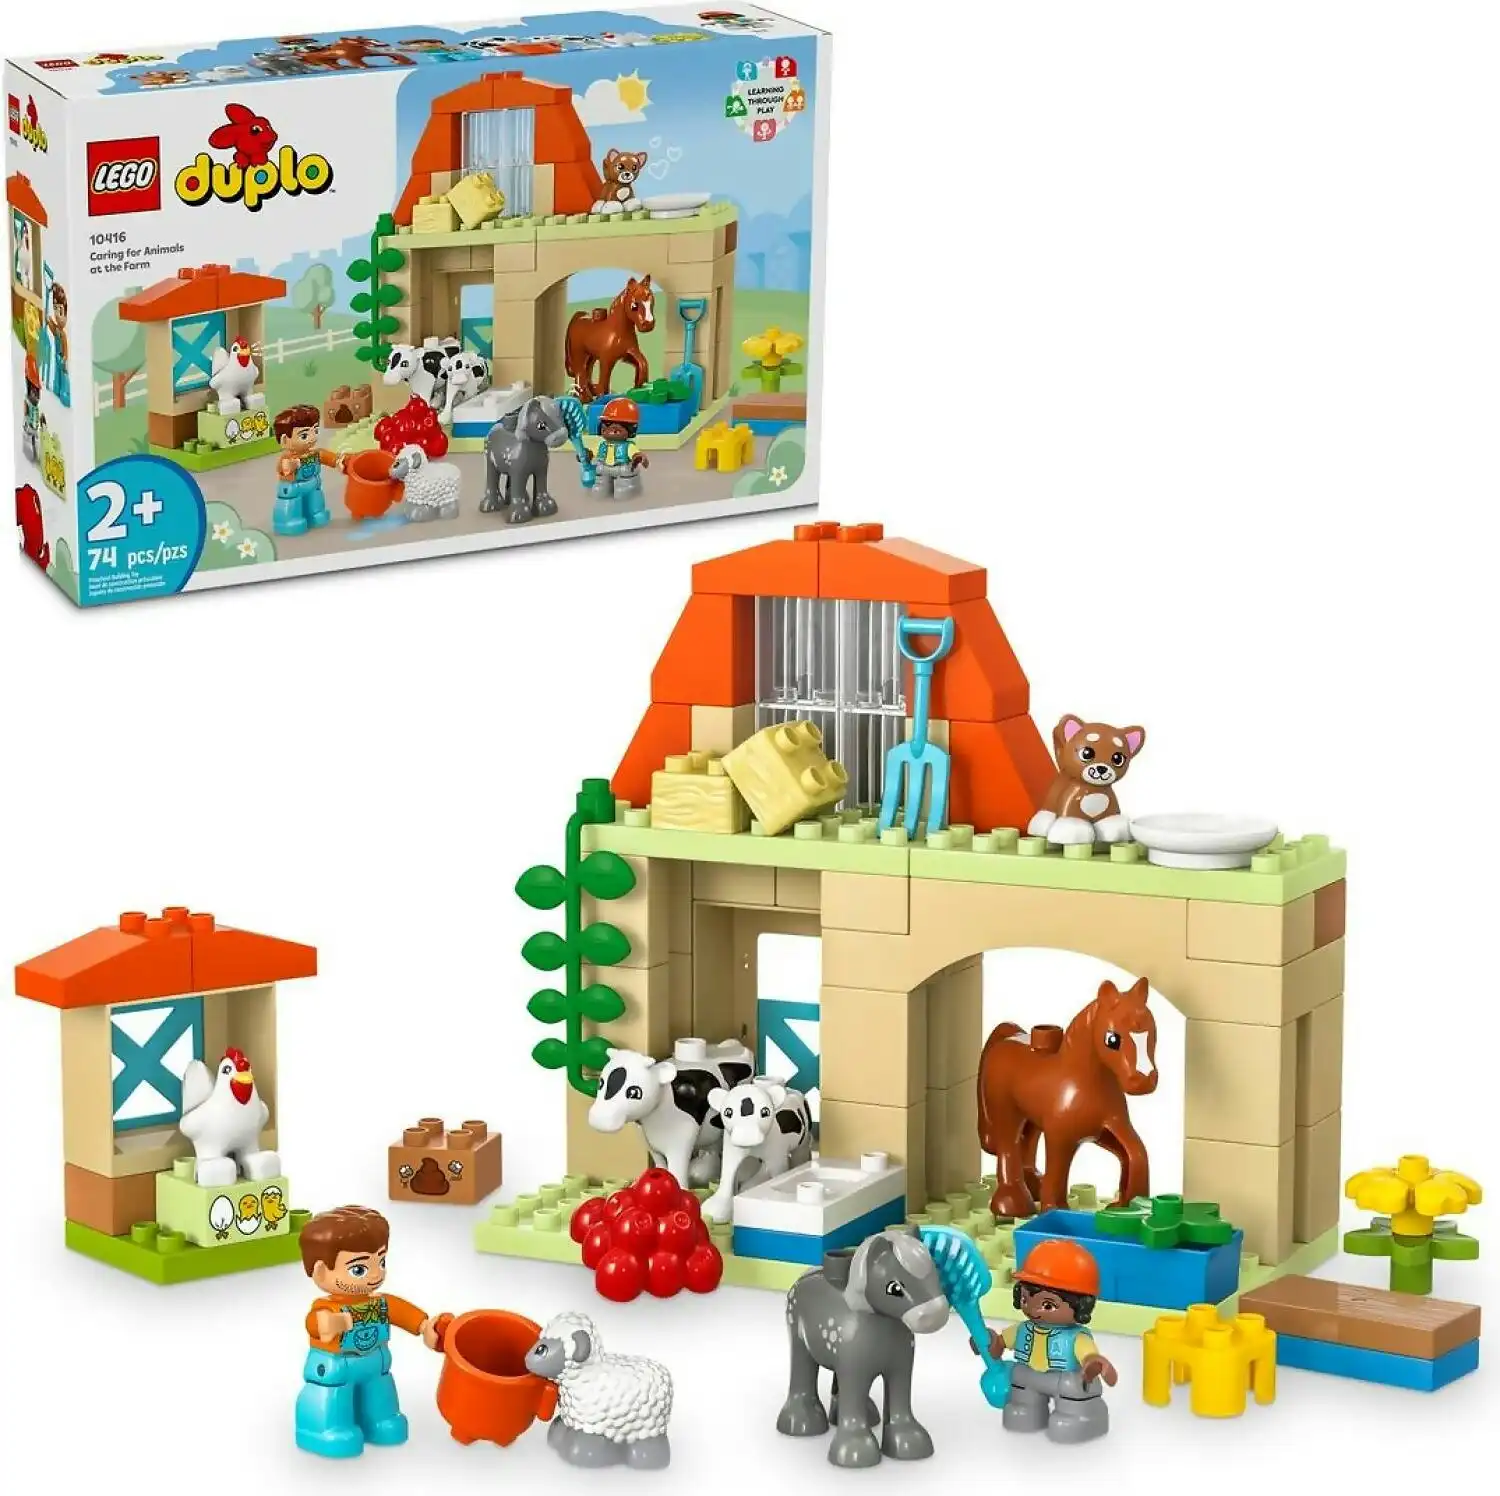 LEGO 10416 Caring for Animals at the Farm - Duplo